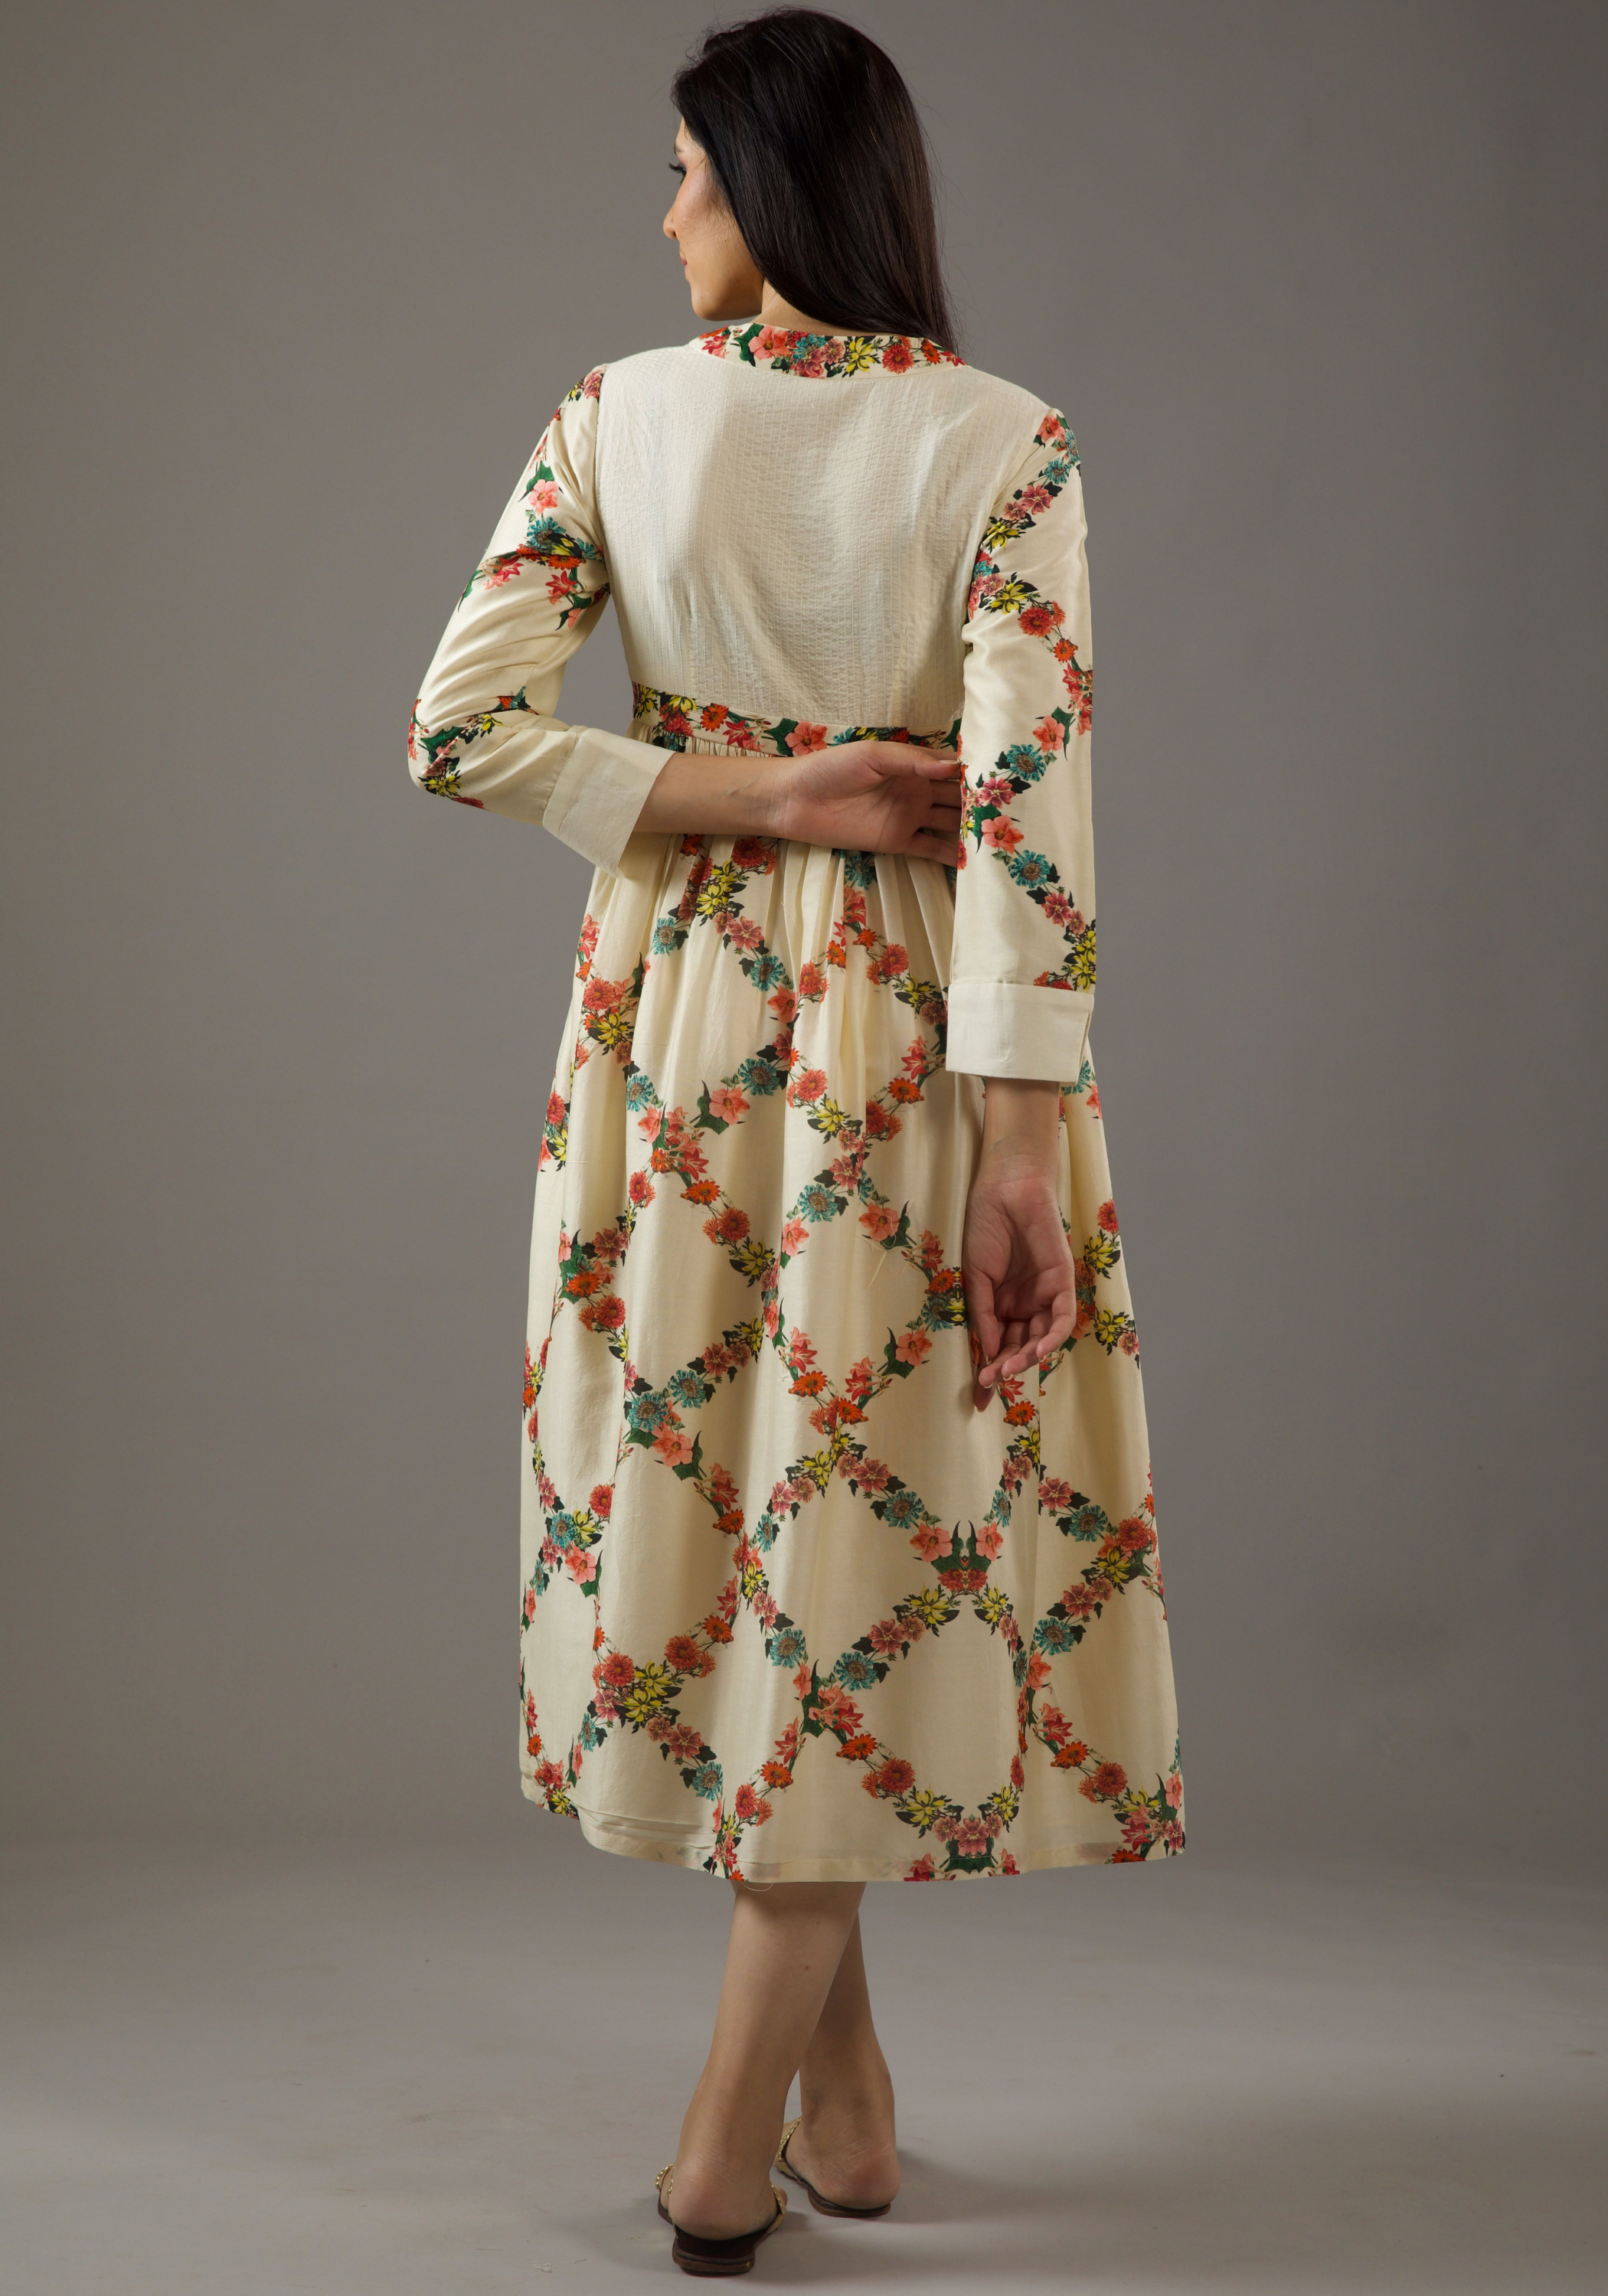 Chanderi Silk Dress With Overall Print